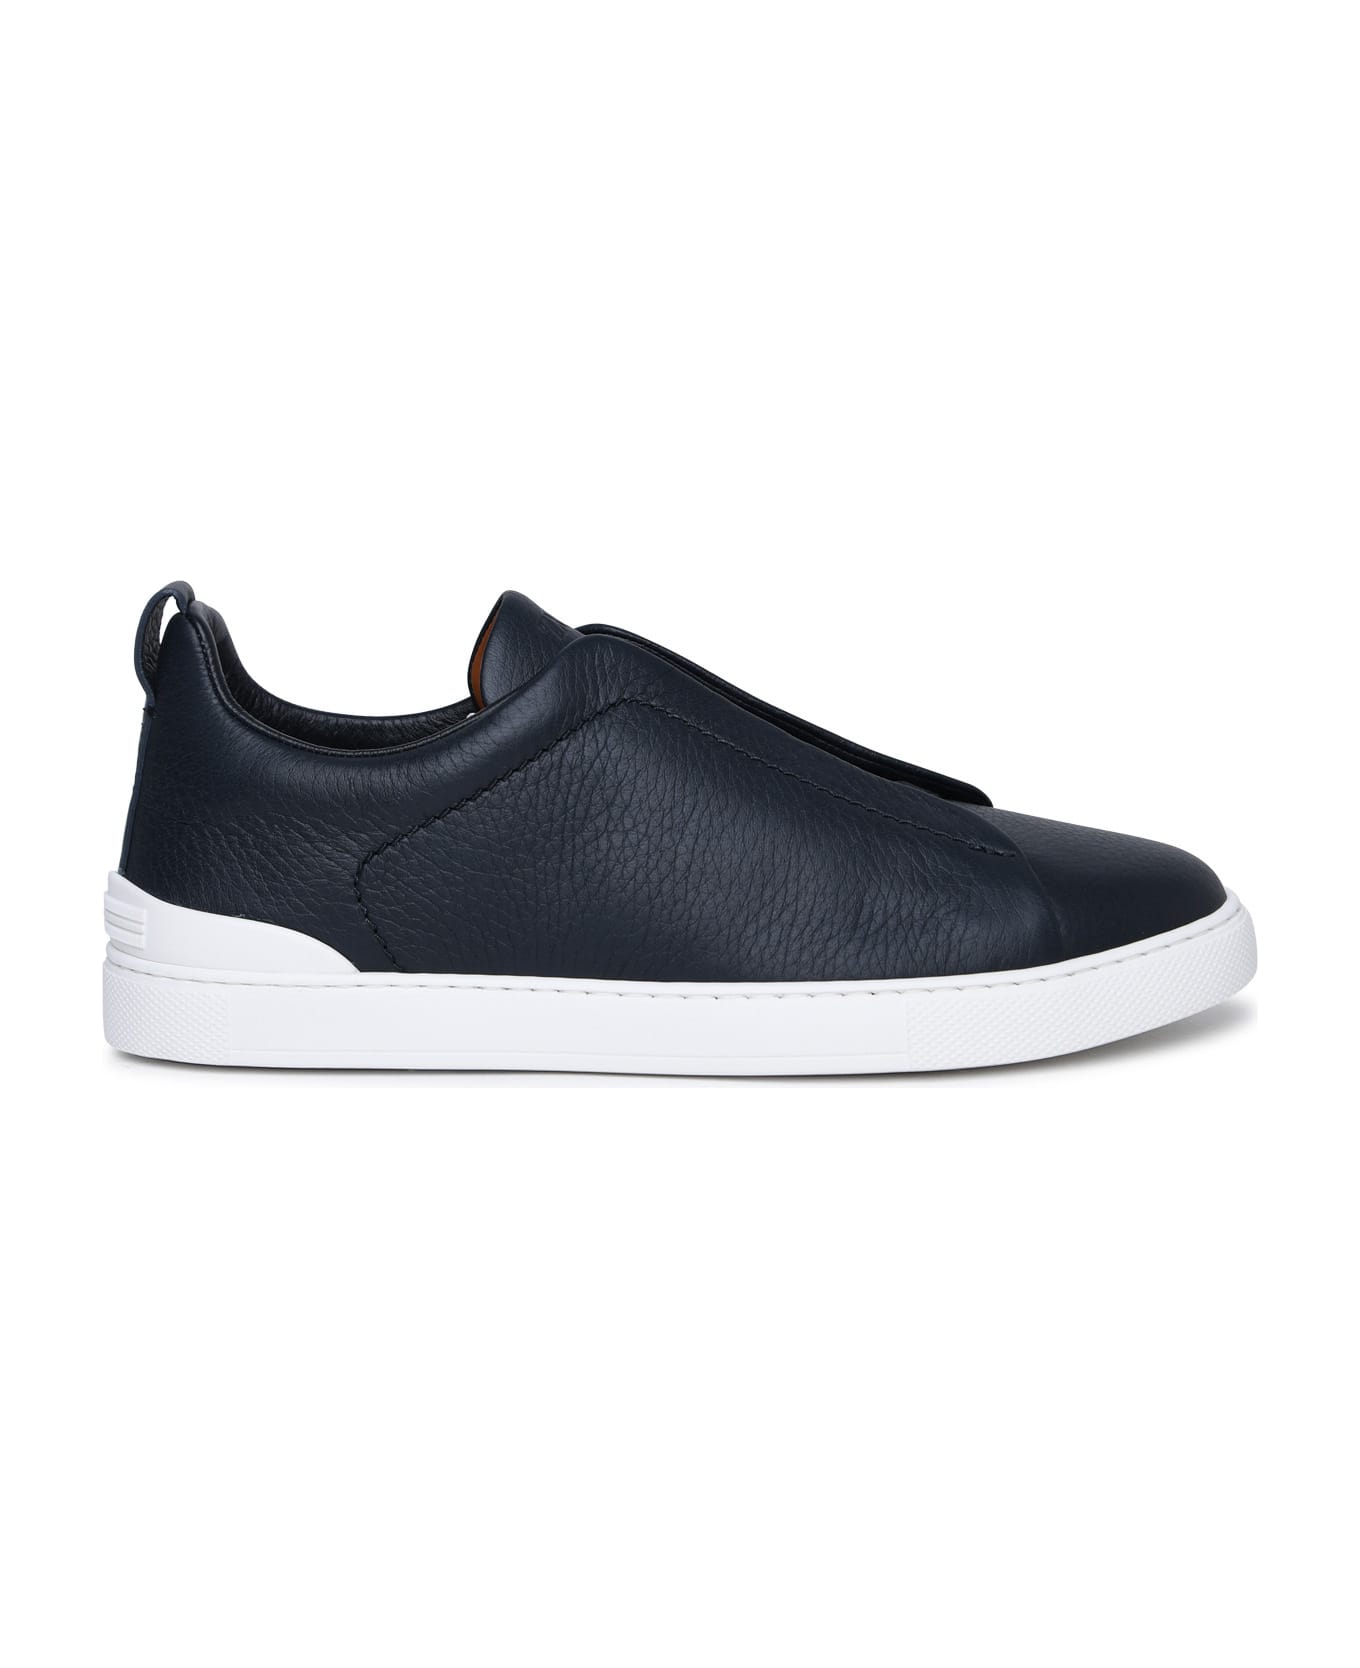 Zegna 'triple Stitch' Blue Leather Sneakers - Blue